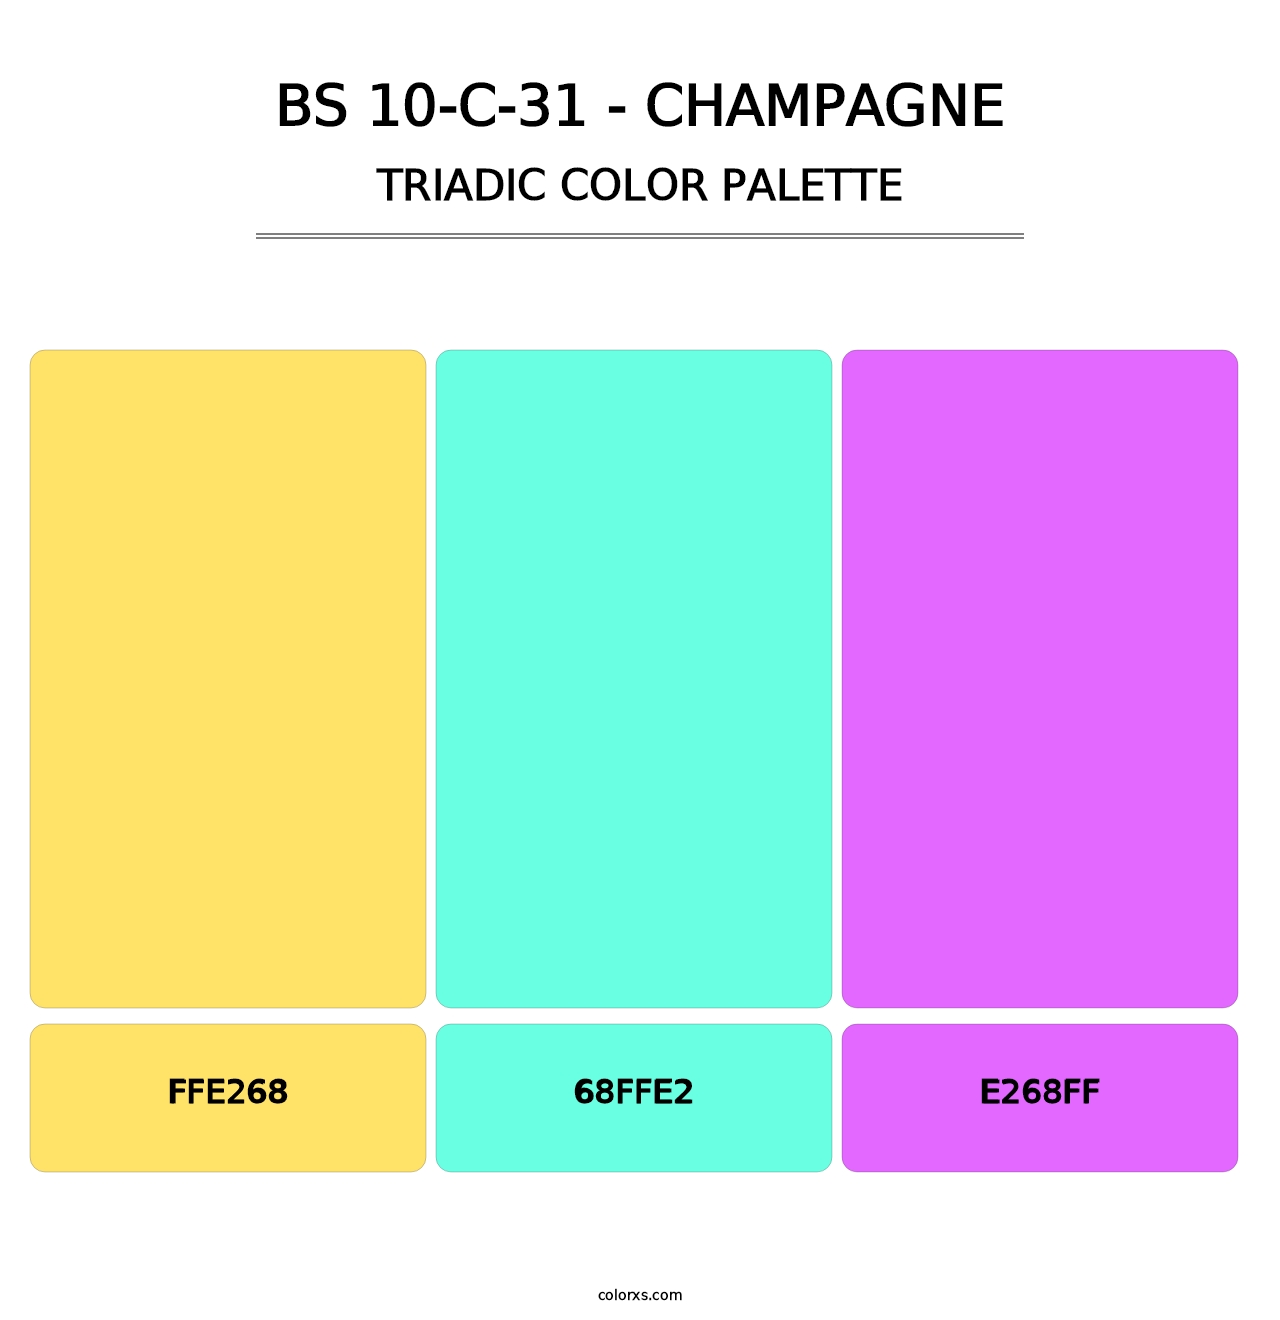 BS 10-C-31 - Champagne - Triadic Color Palette